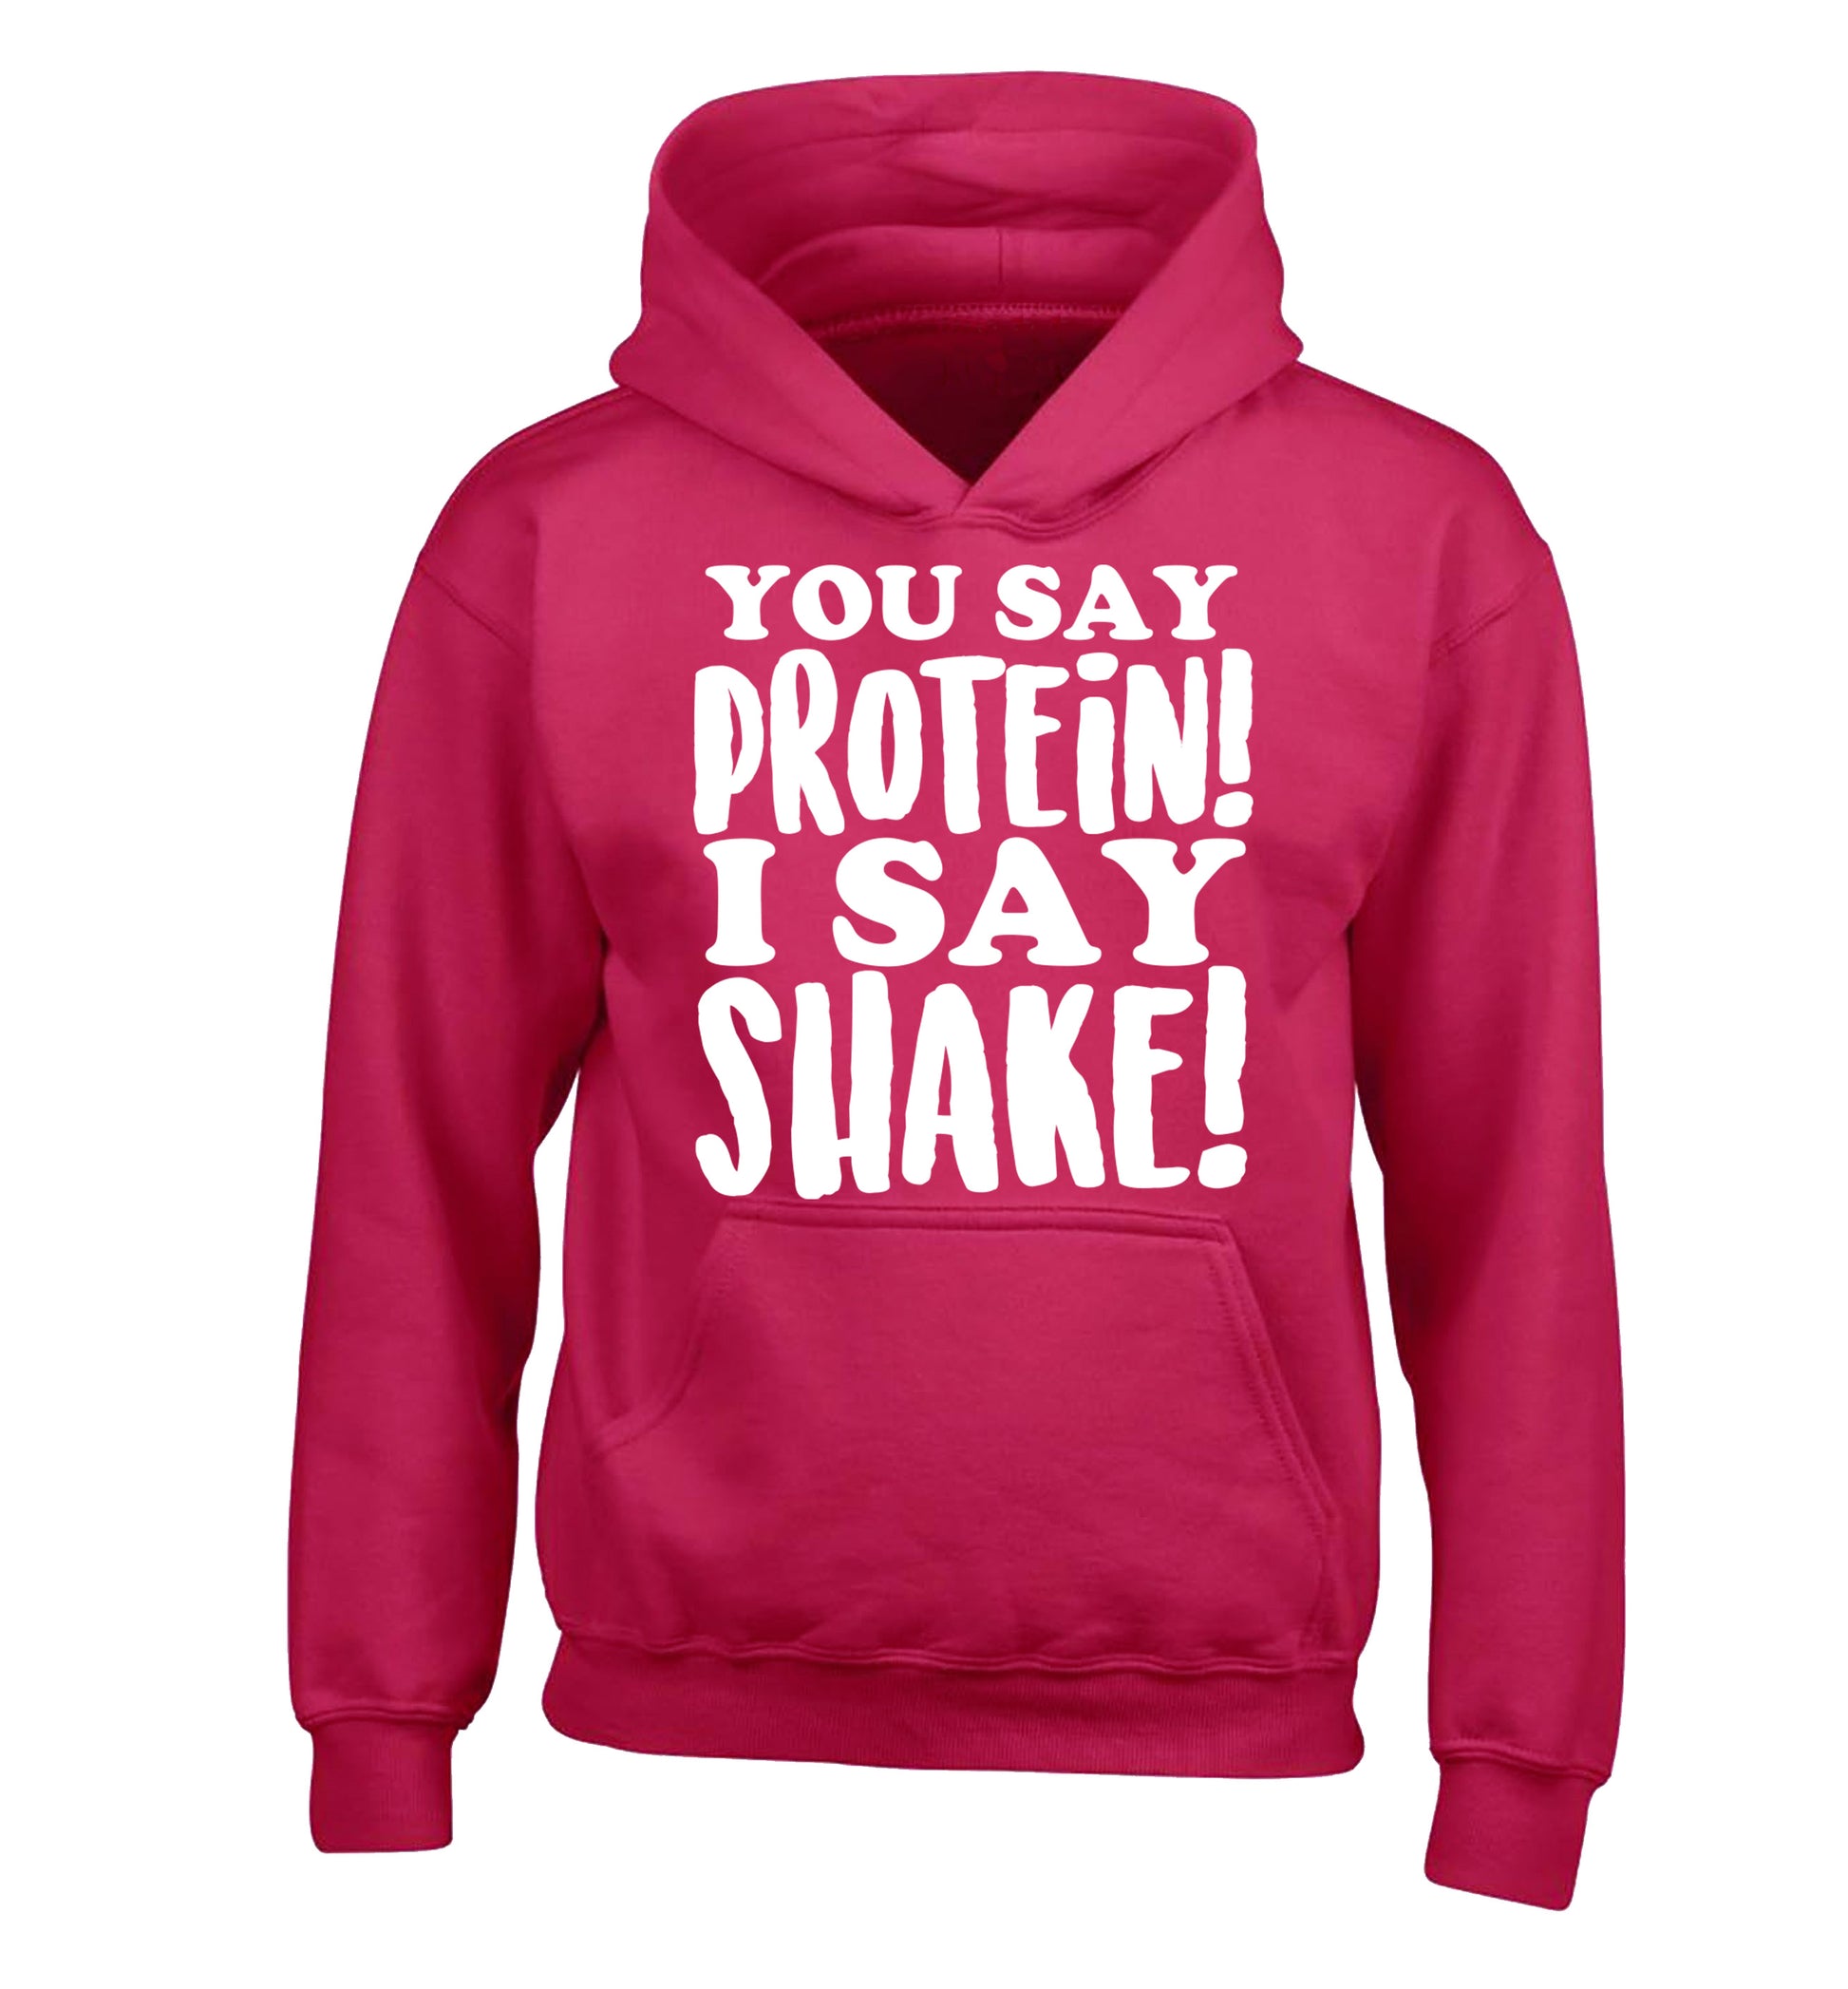 You say protein I say shake! children's pink hoodie 12-14 Years